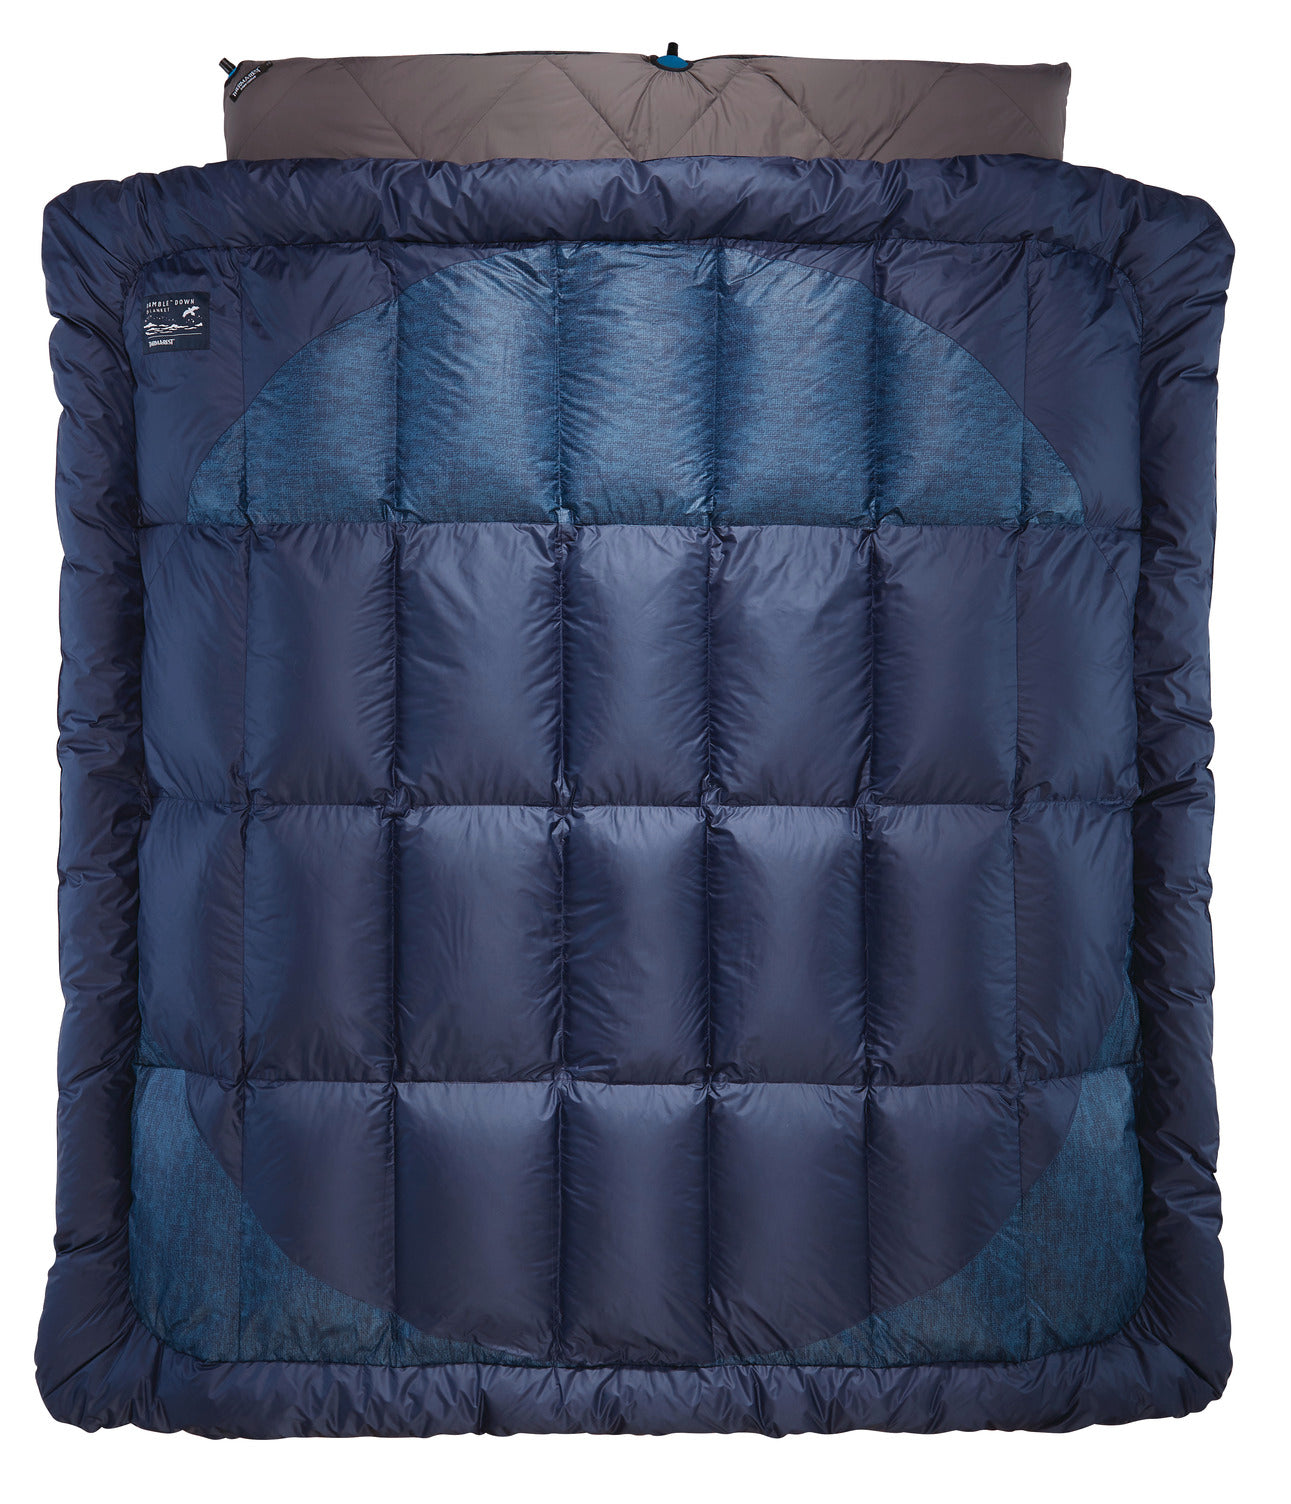 Thermarest Ramble Down Blanket - Eclipse Blue